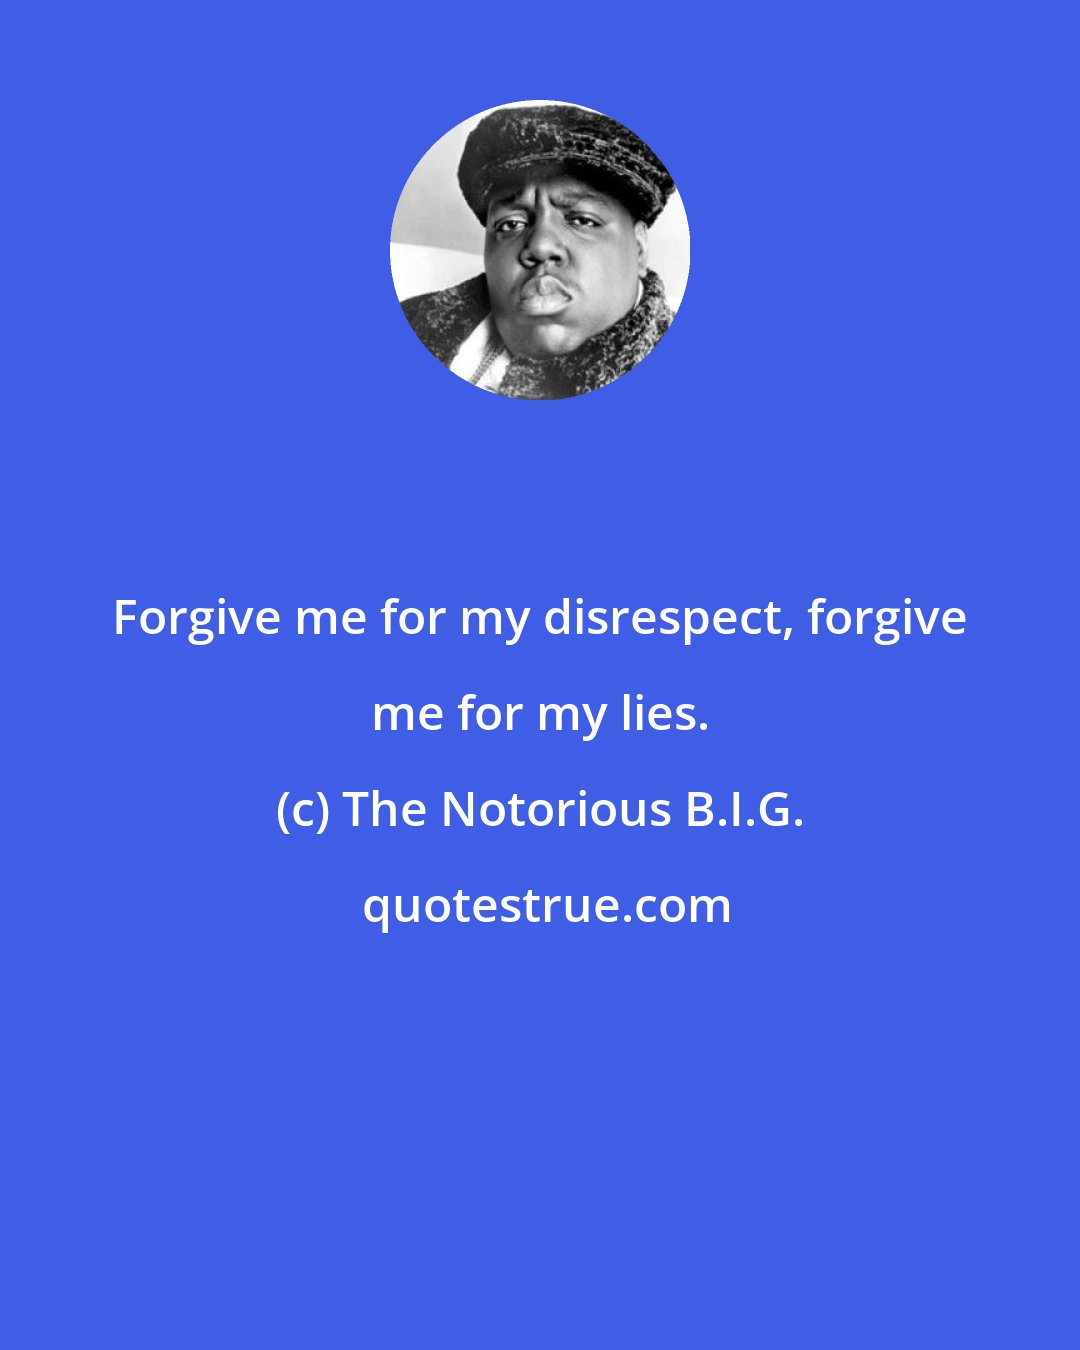 The Notorious B.I.G.: Forgive me for my disrespect, forgive me for my lies.